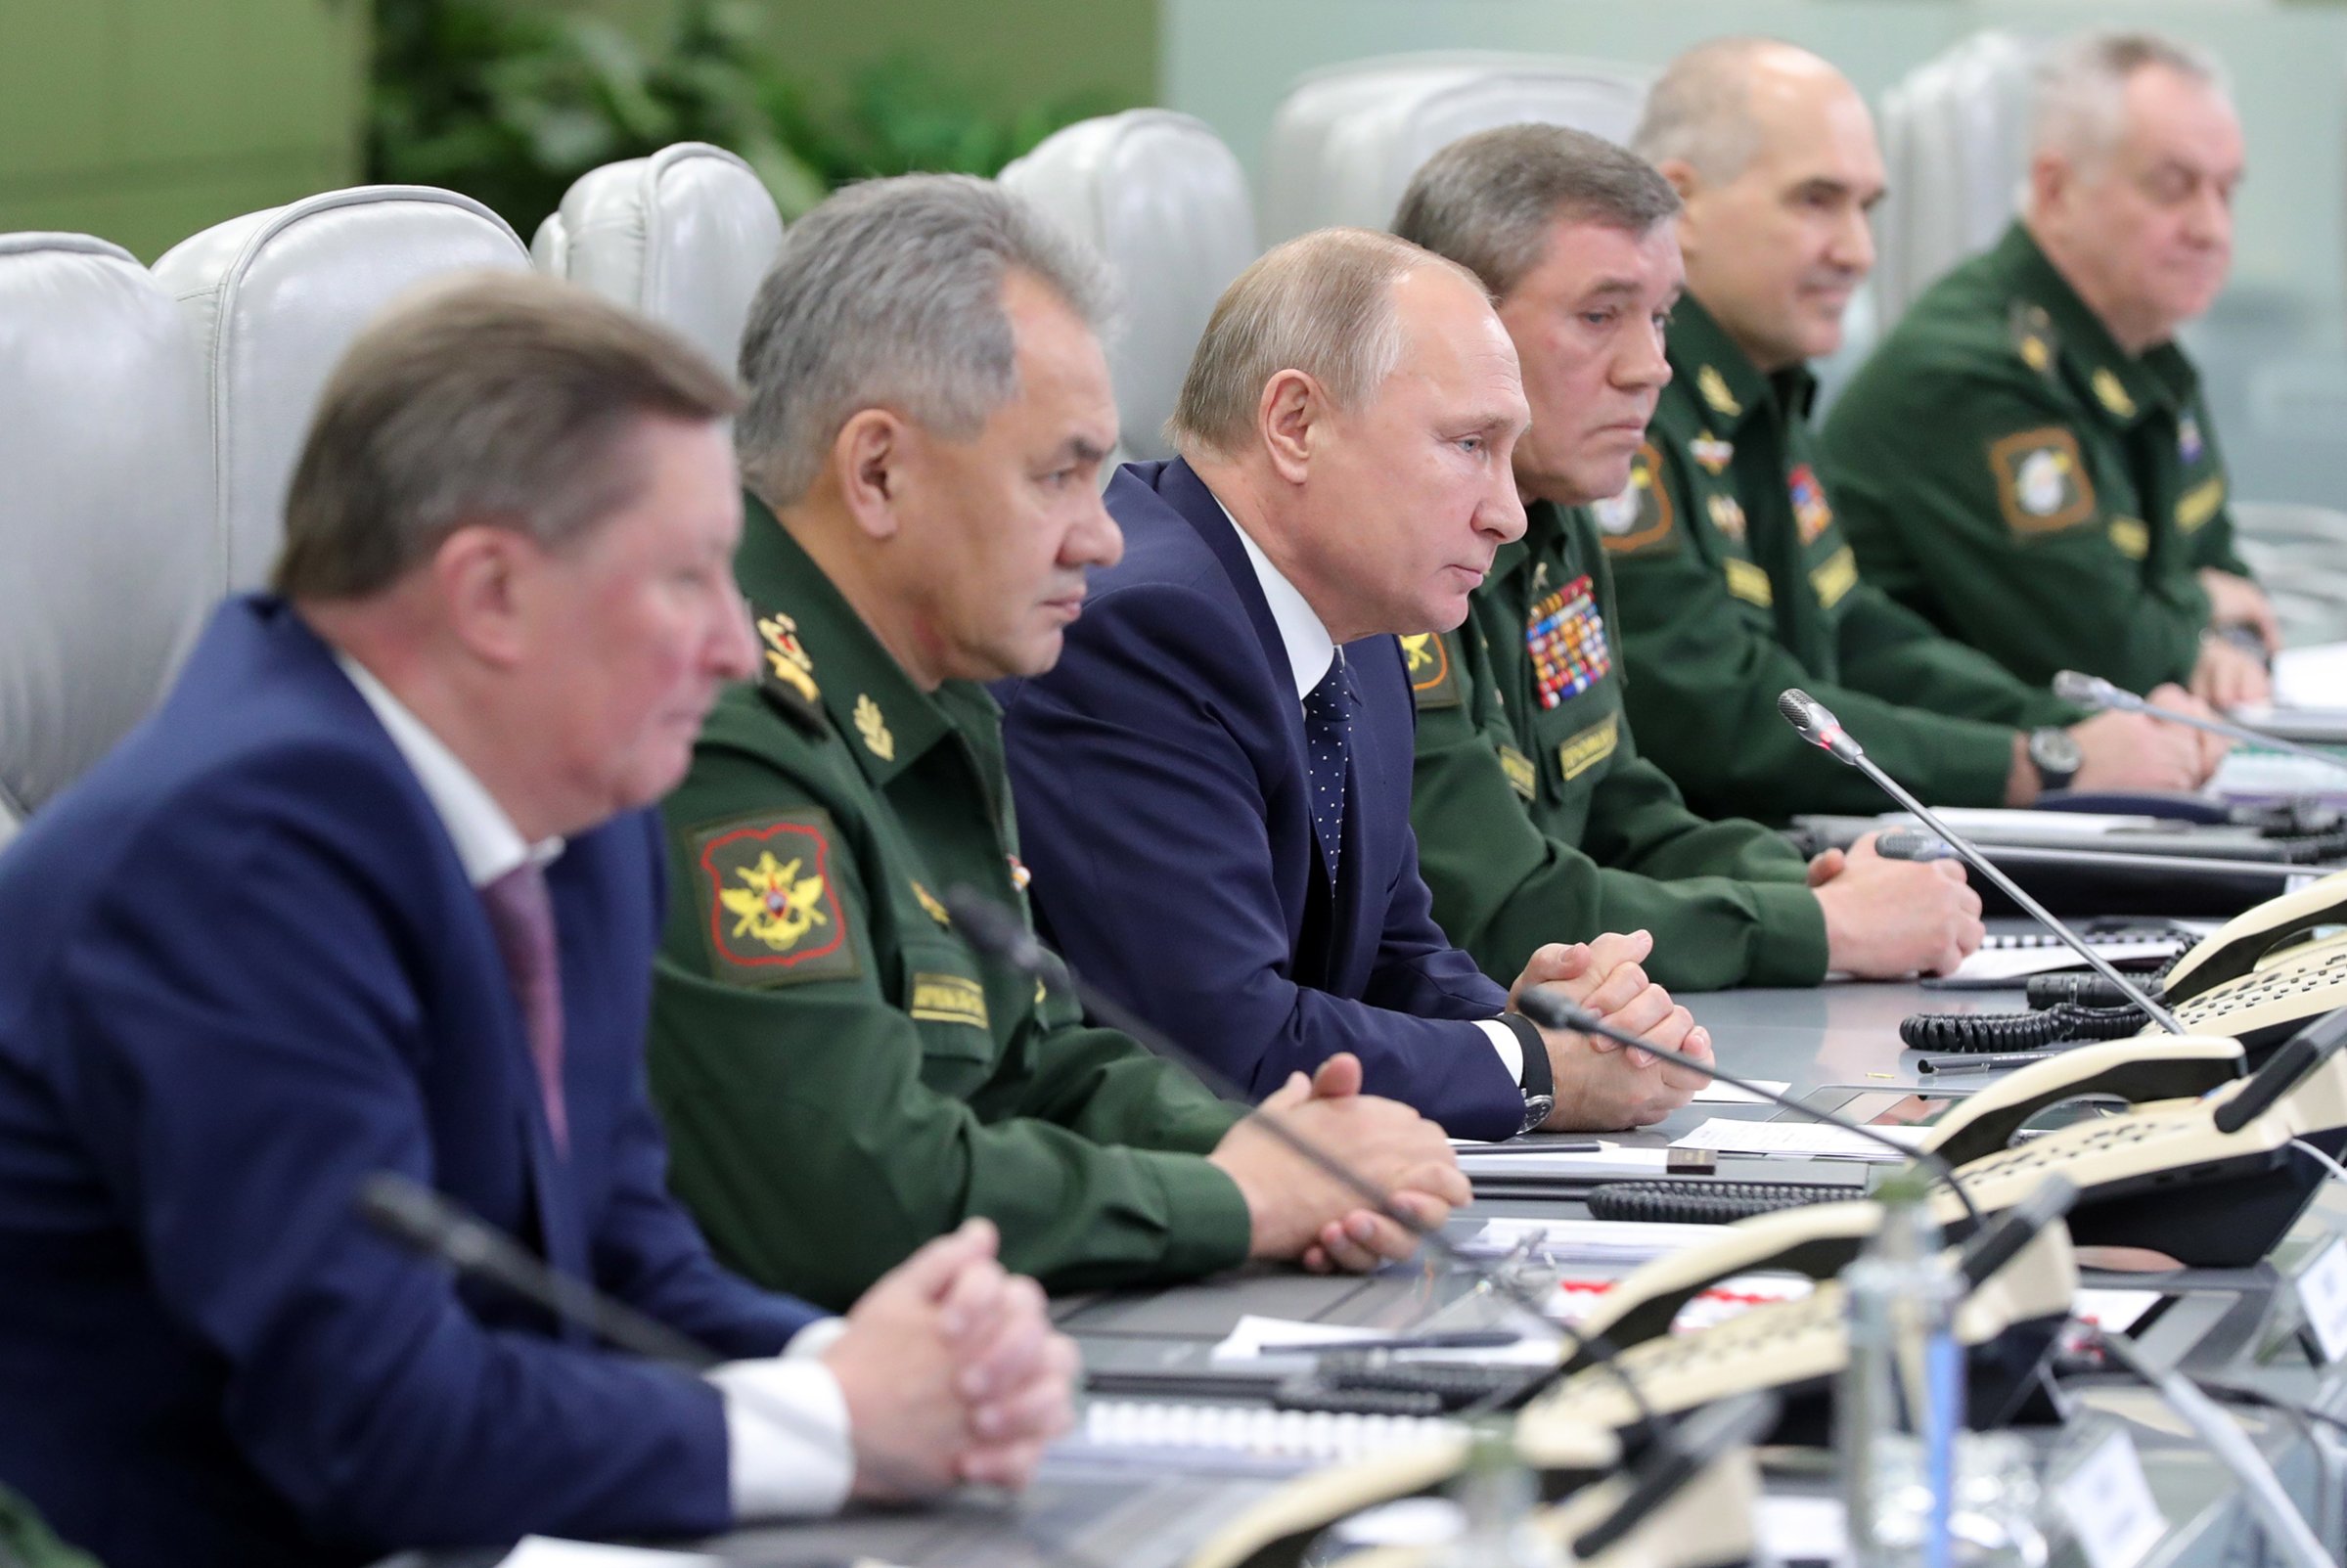 Vladimir Putin, center, watches the launch of a new Russian hypersonic missile system on Dec. 26